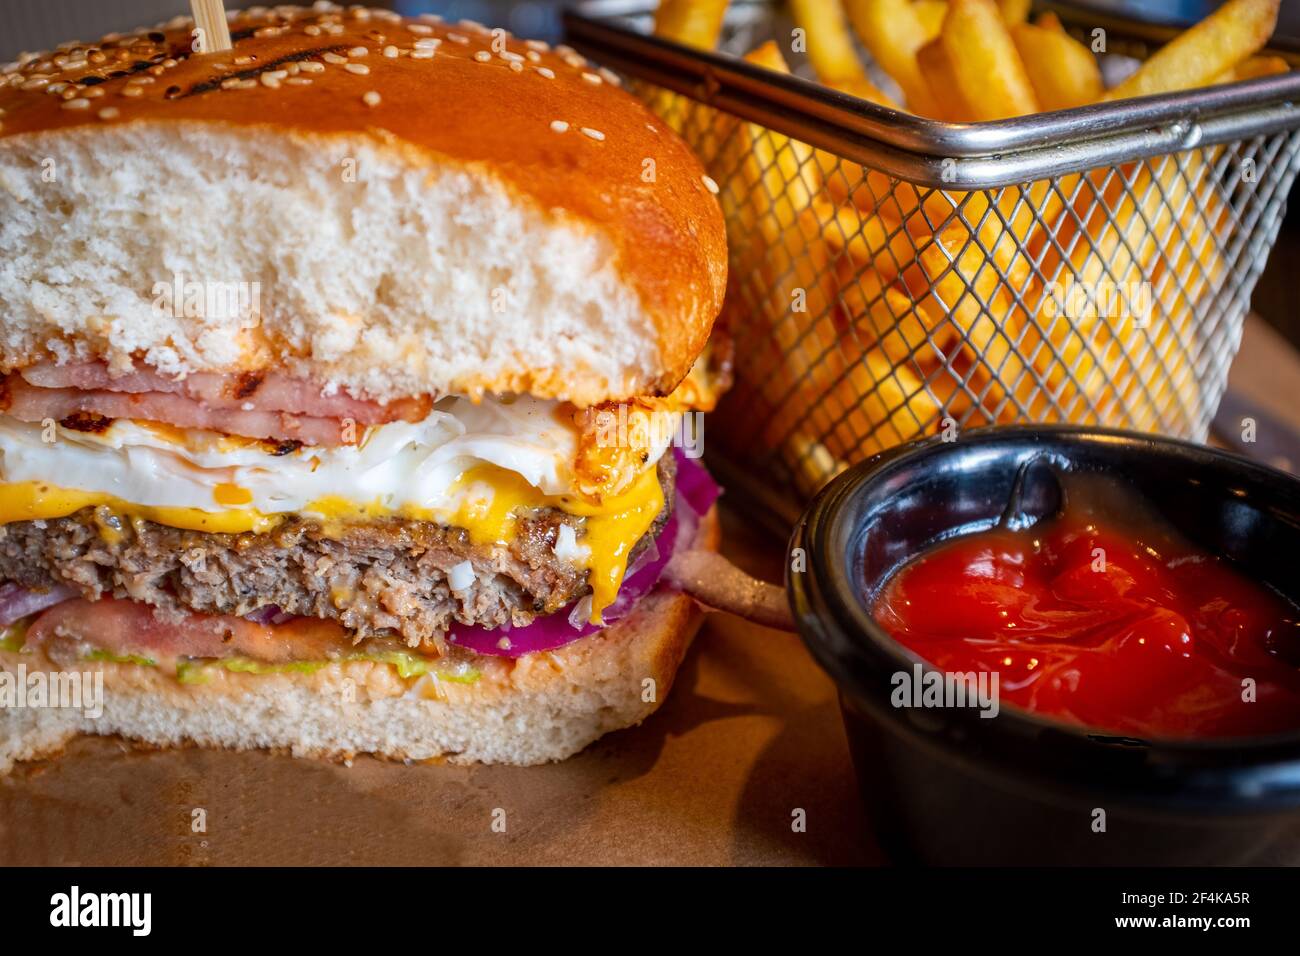 Home made tasty beef burger with egg, bacon, and chips with tomato sauce Stock Photo